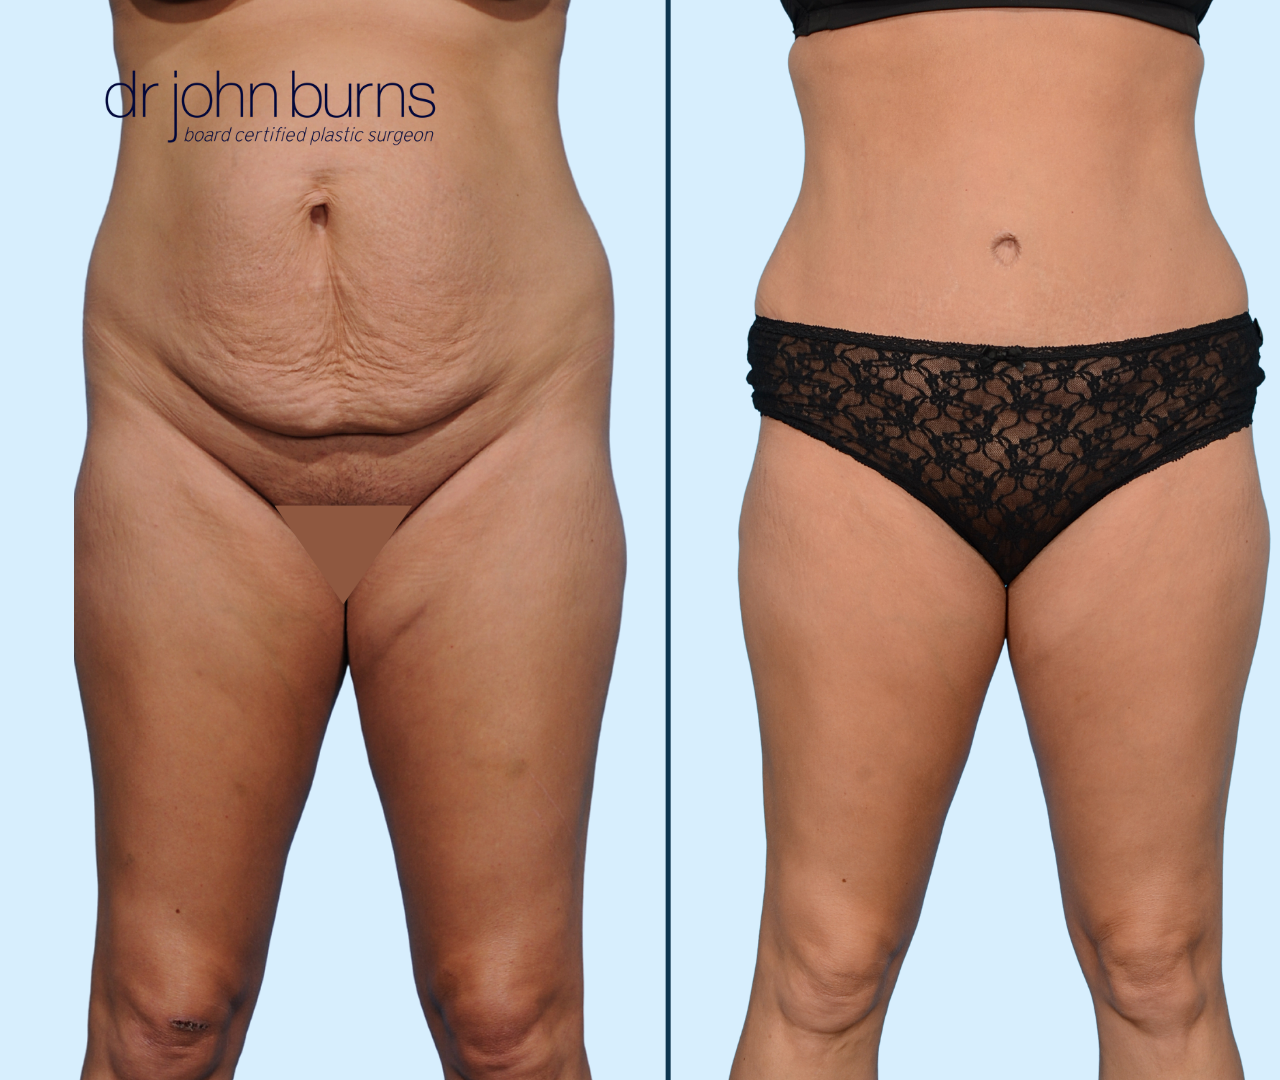 Case 22-Front View-Before & After Standard Tummy Tuck by Dallas Plastic Surgeon, Dr. John Burns